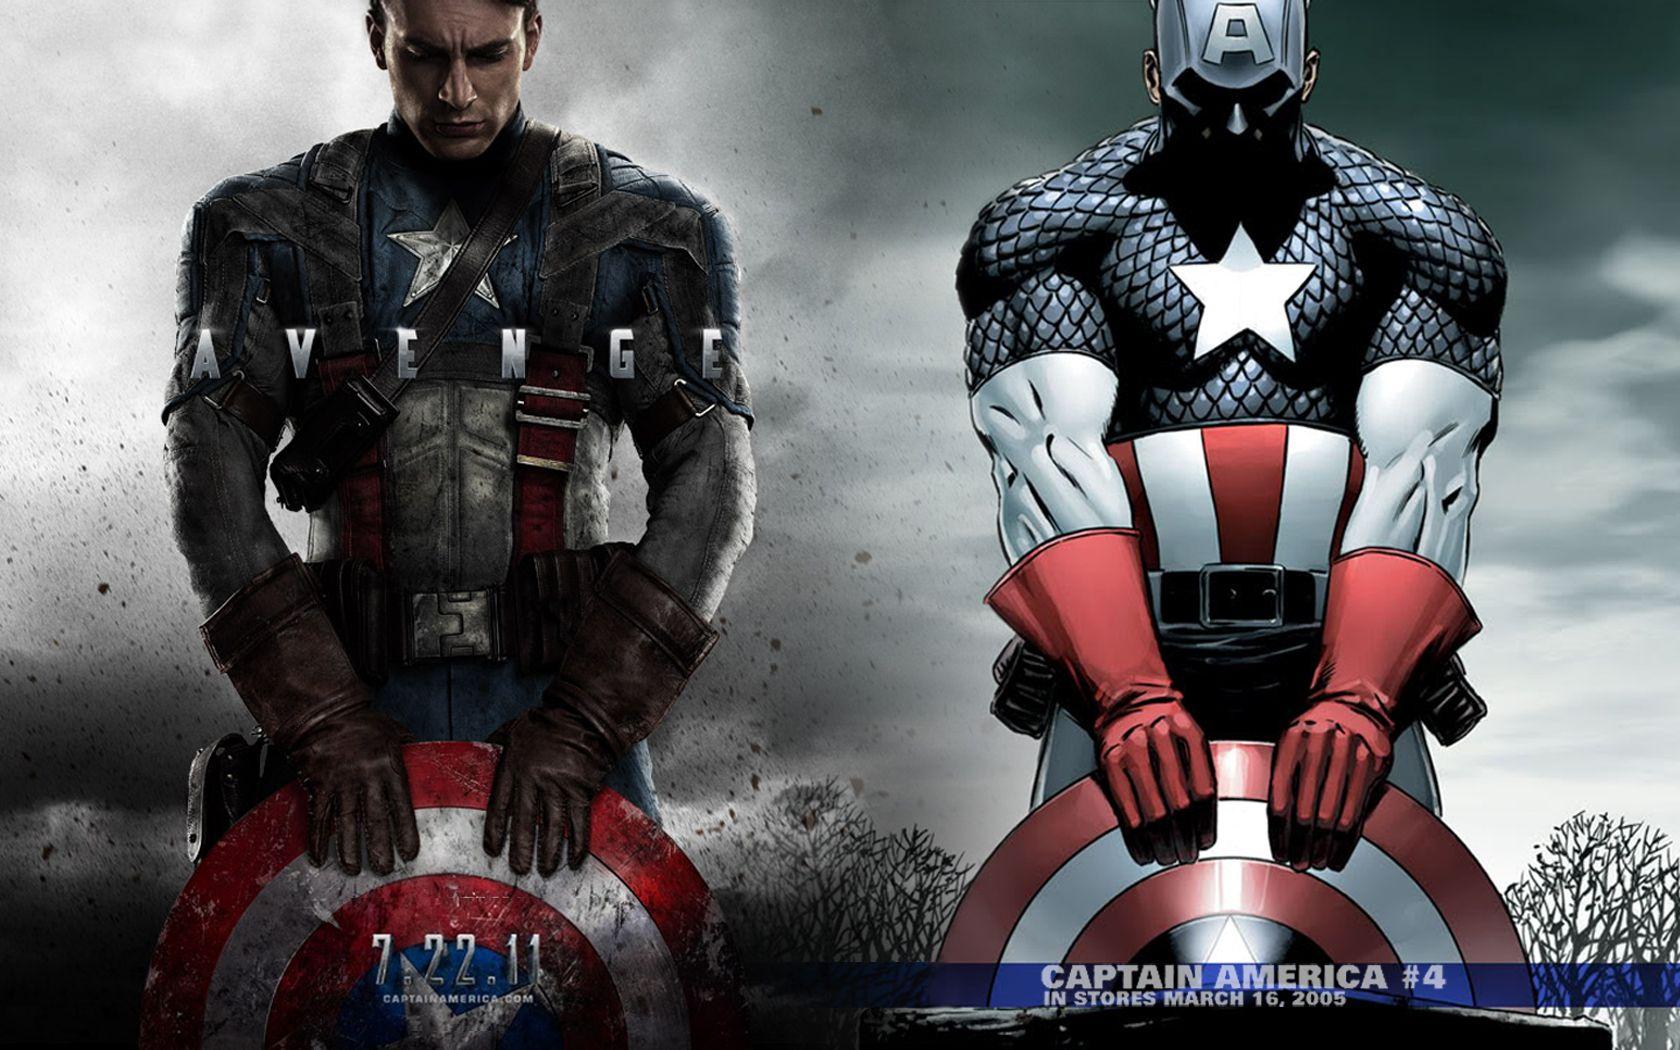 Captain America love the comic book image matching to